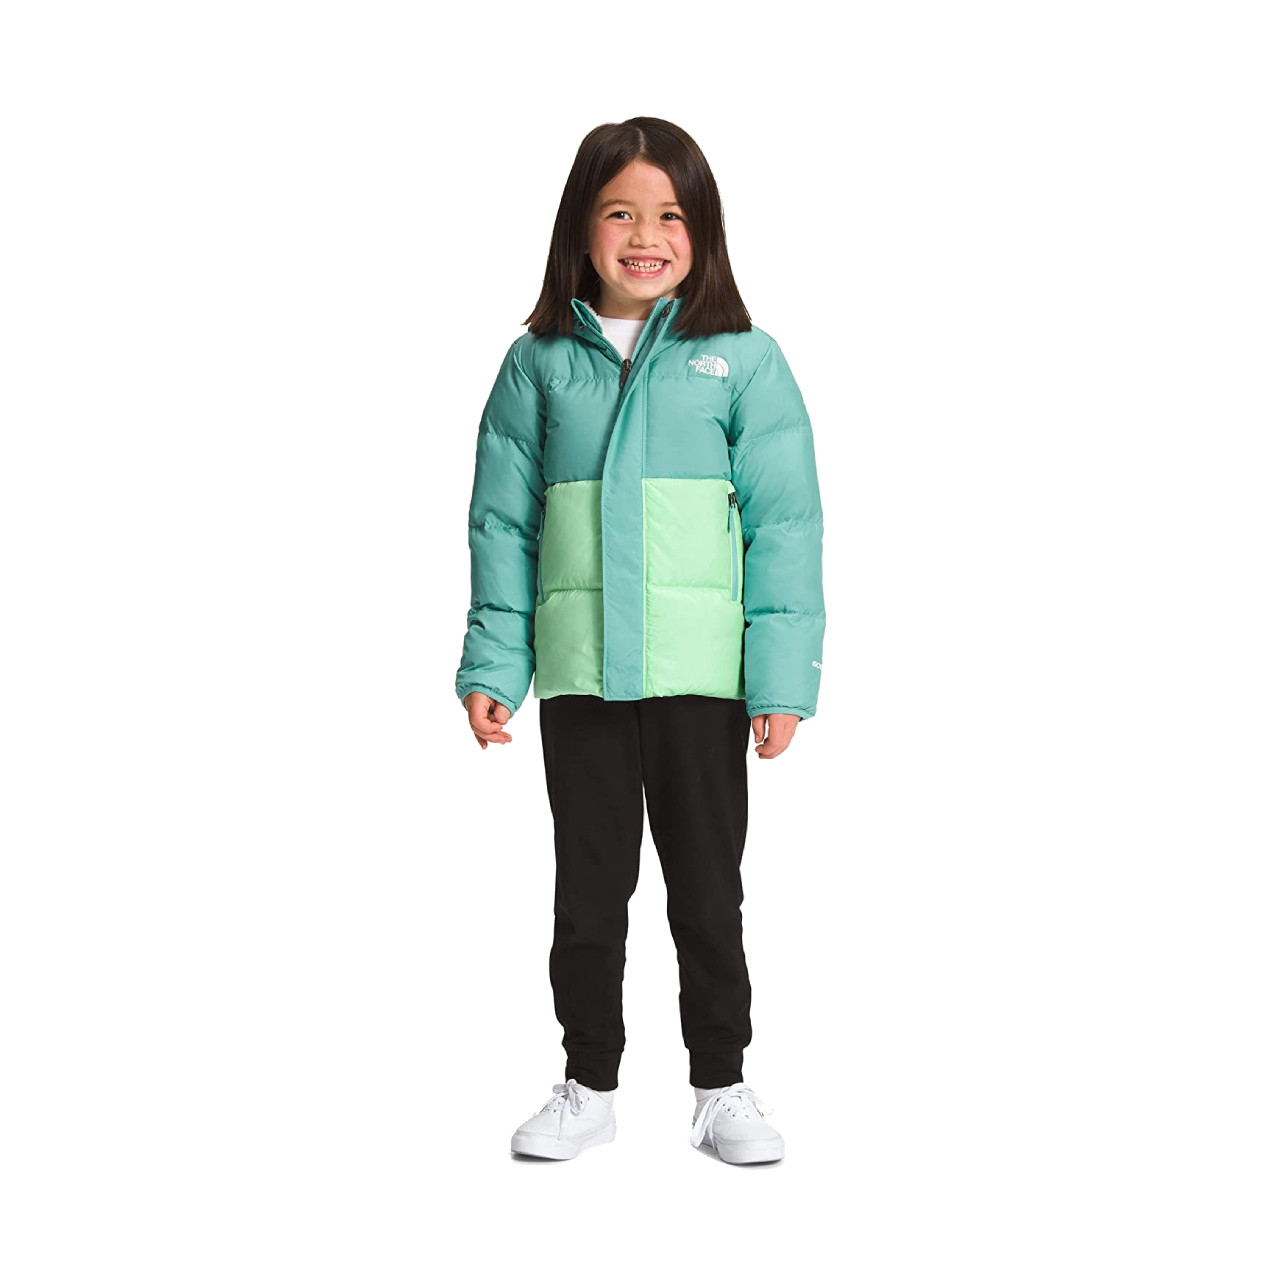 The North Face North Down Fleece-Lined Parka - Boy's - 2023 model